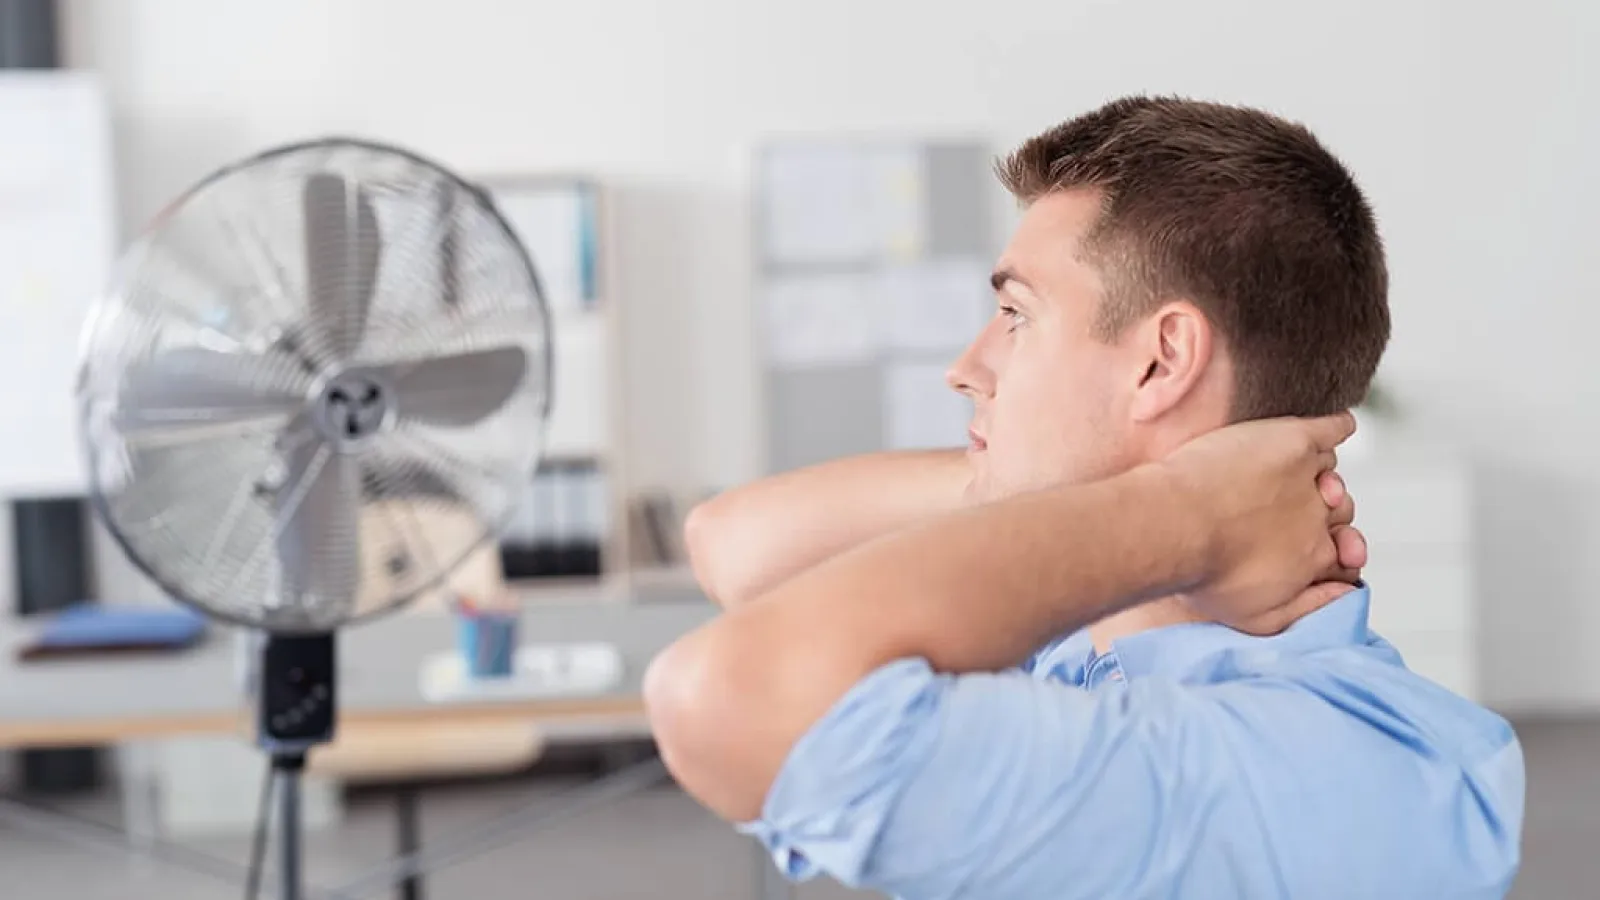 Forgot to Schedule Commercial Air Conditioning Service?